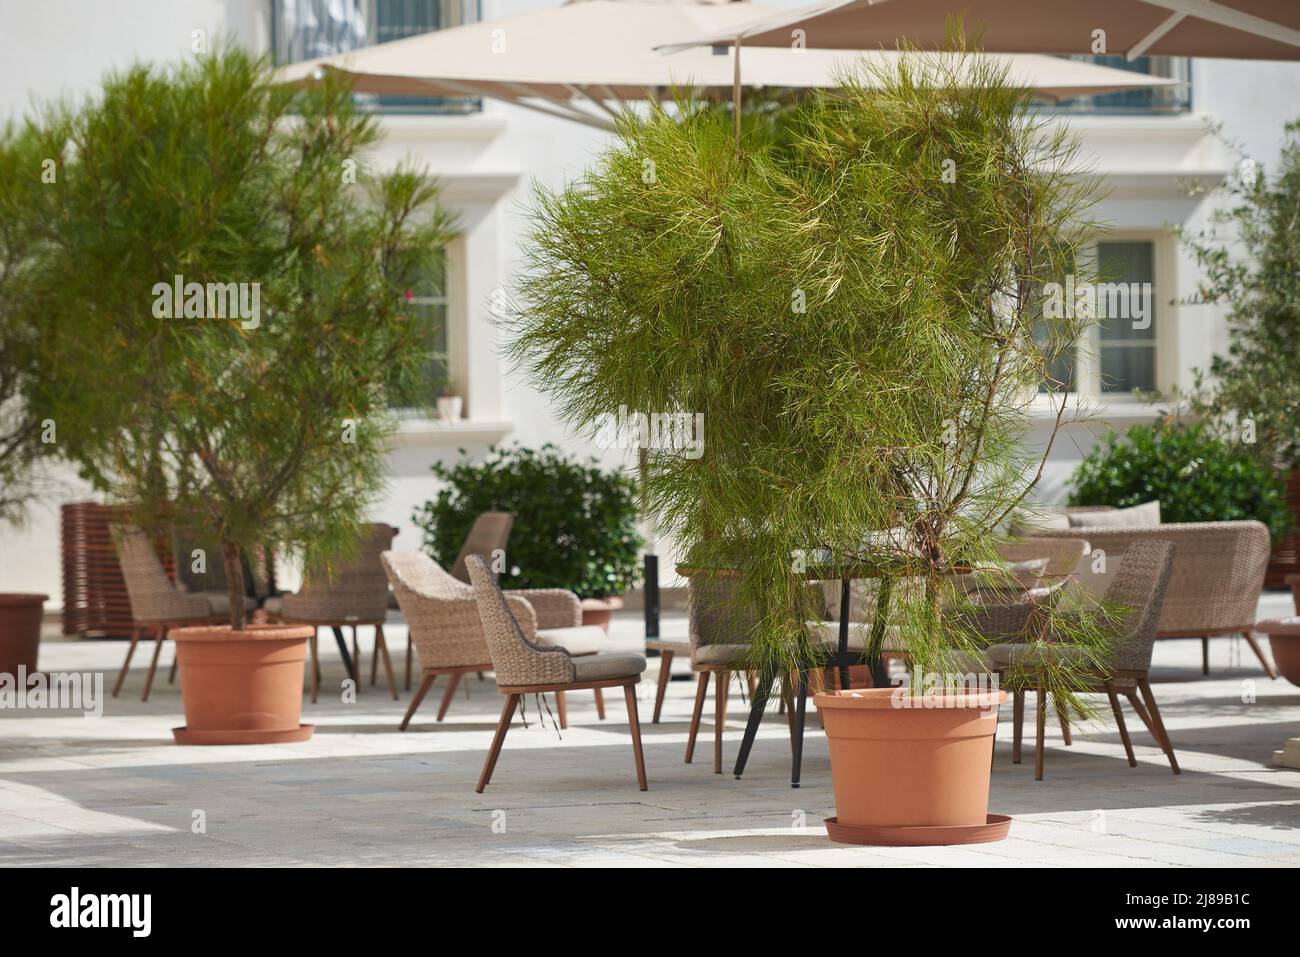 Potted ornamental trees in a outdoor restaurant Stock Photo